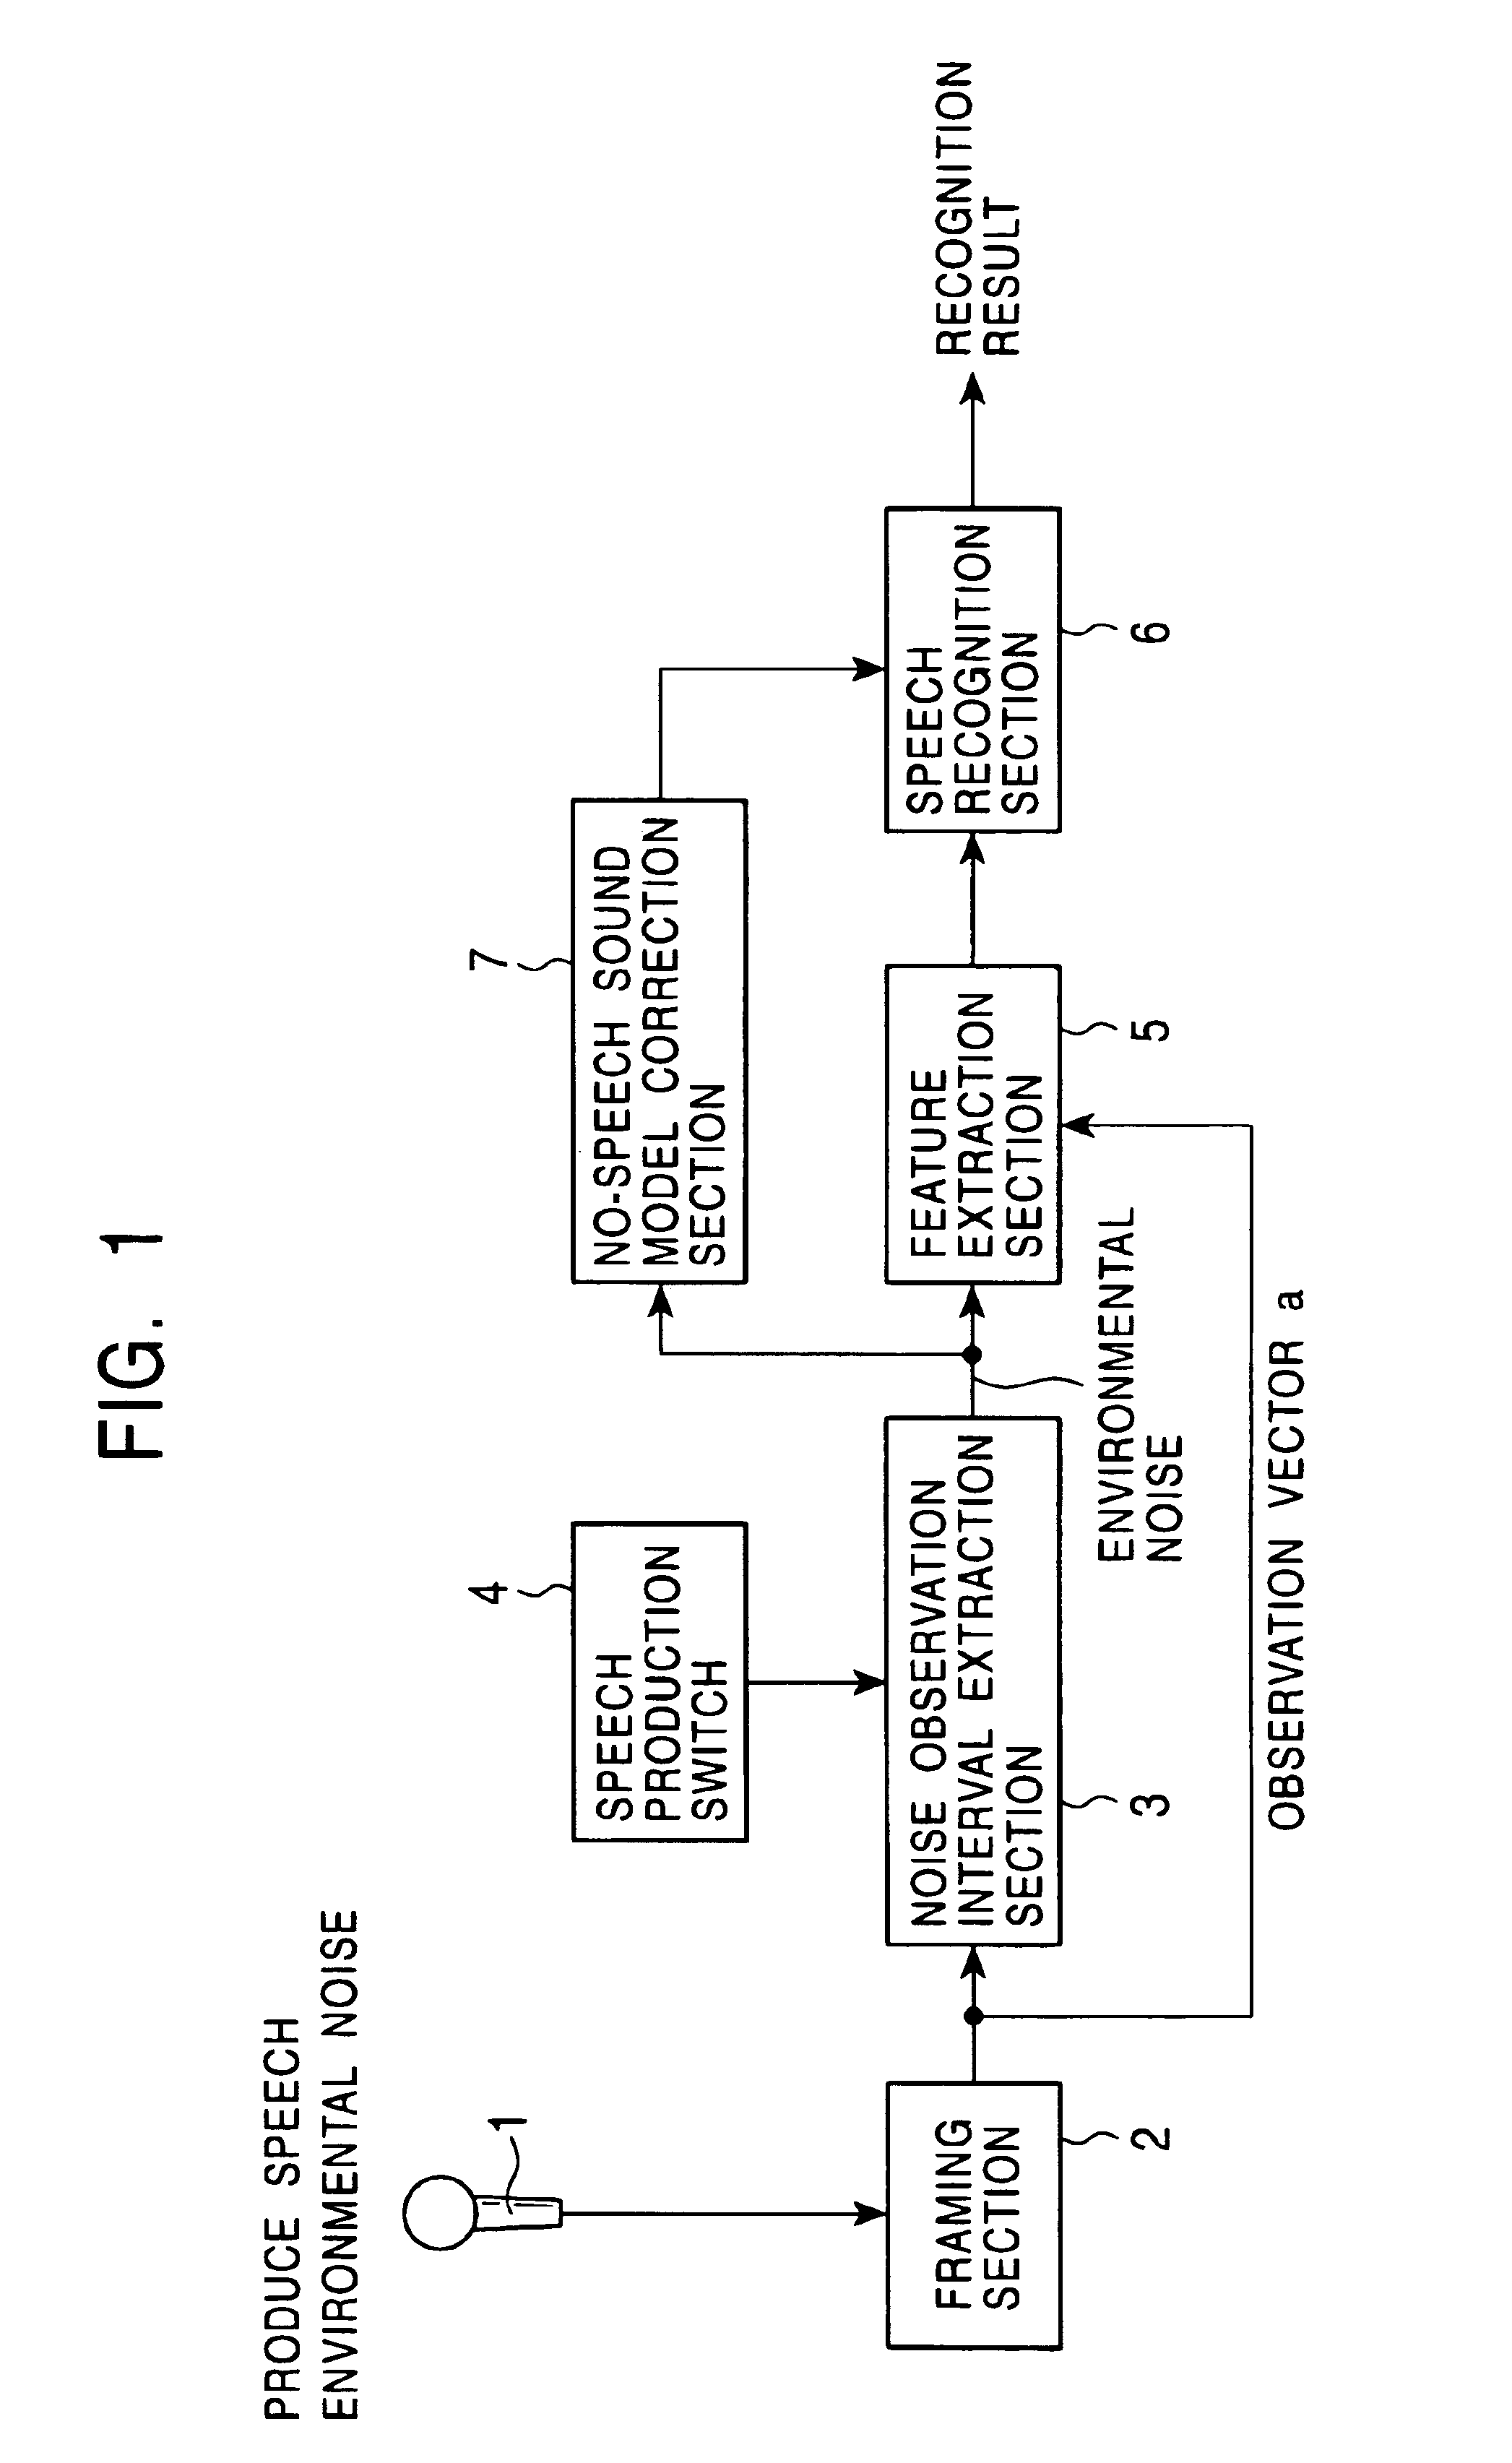 Model adaptive apparatus for performing adaptation of a model used in pattern recognition considering recentness of a received pattern data